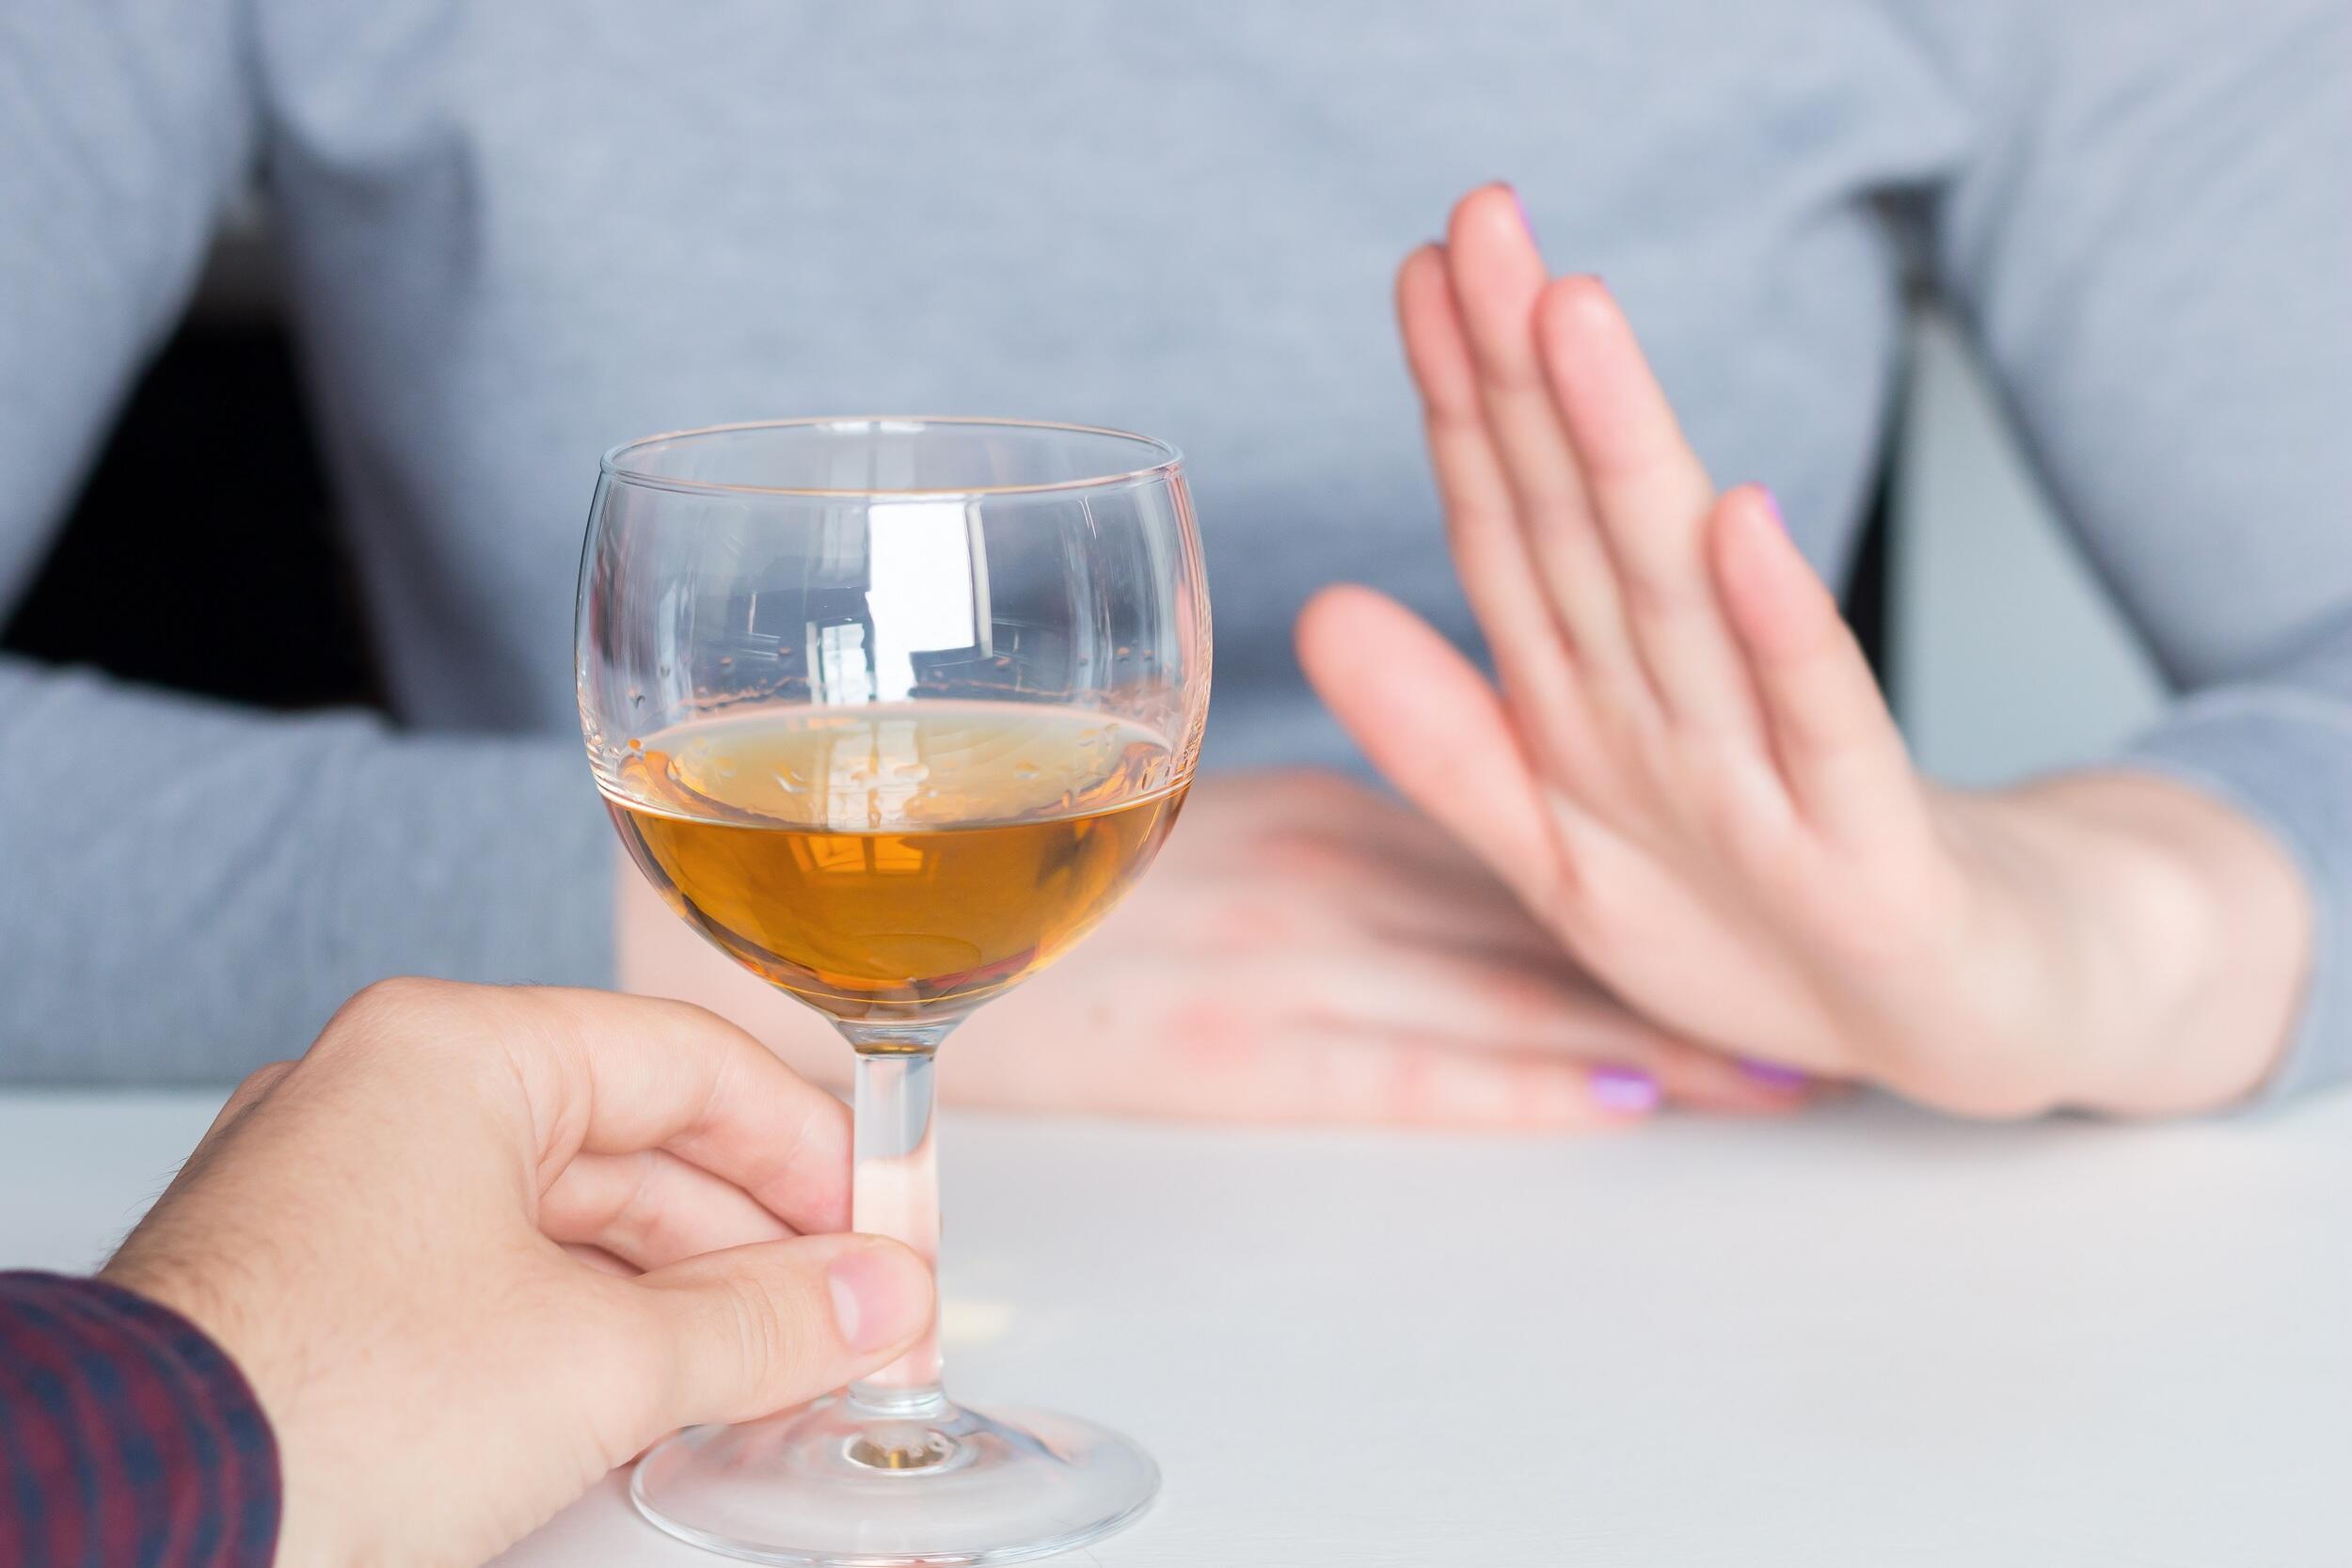 A raised hand to an offered glass of wine implies the refusal of the drink.